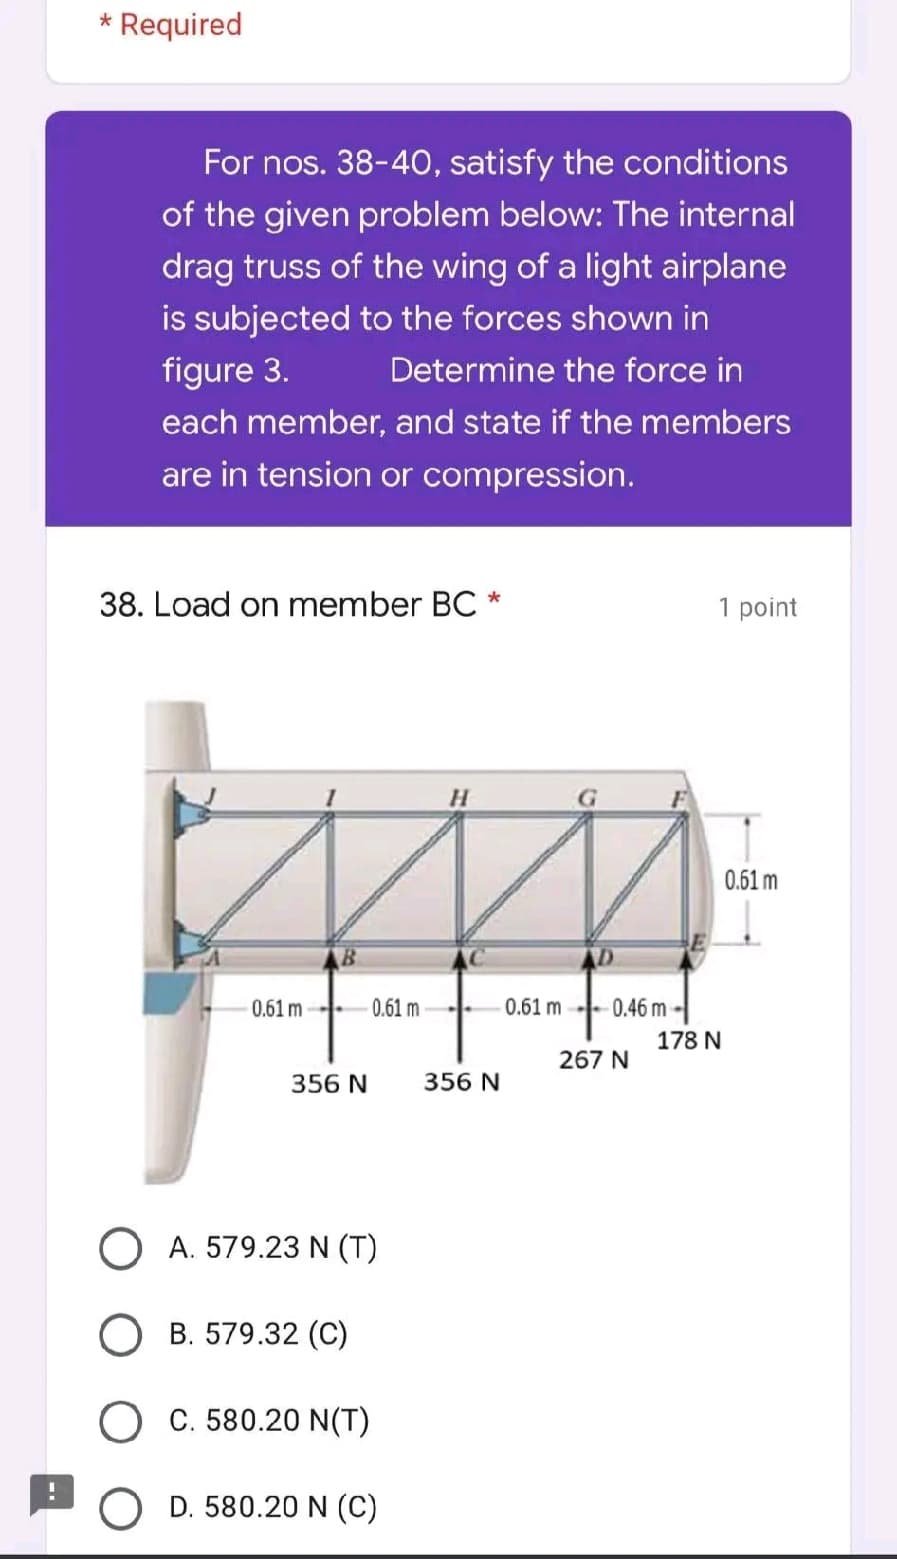 * Required
For nos. 38-40, satisfy the conditions
of the given problem below: The internal
drag truss of the wing of a light airplane
is subjected to the forces shown in
Determine the force in
figure 3.
each member, and state if the members
are in tension or compression.
38. Load on member BC *
1 point
H
0.61 m
0.61 m-
0.61 m
356 N
O A. 579.23 N (T)
B. 579.32 (C)
O C. 580.20 N(T)
D. 580.20 N (C)
356 N
0.61 m
-0.46 m-
267 N
178 N